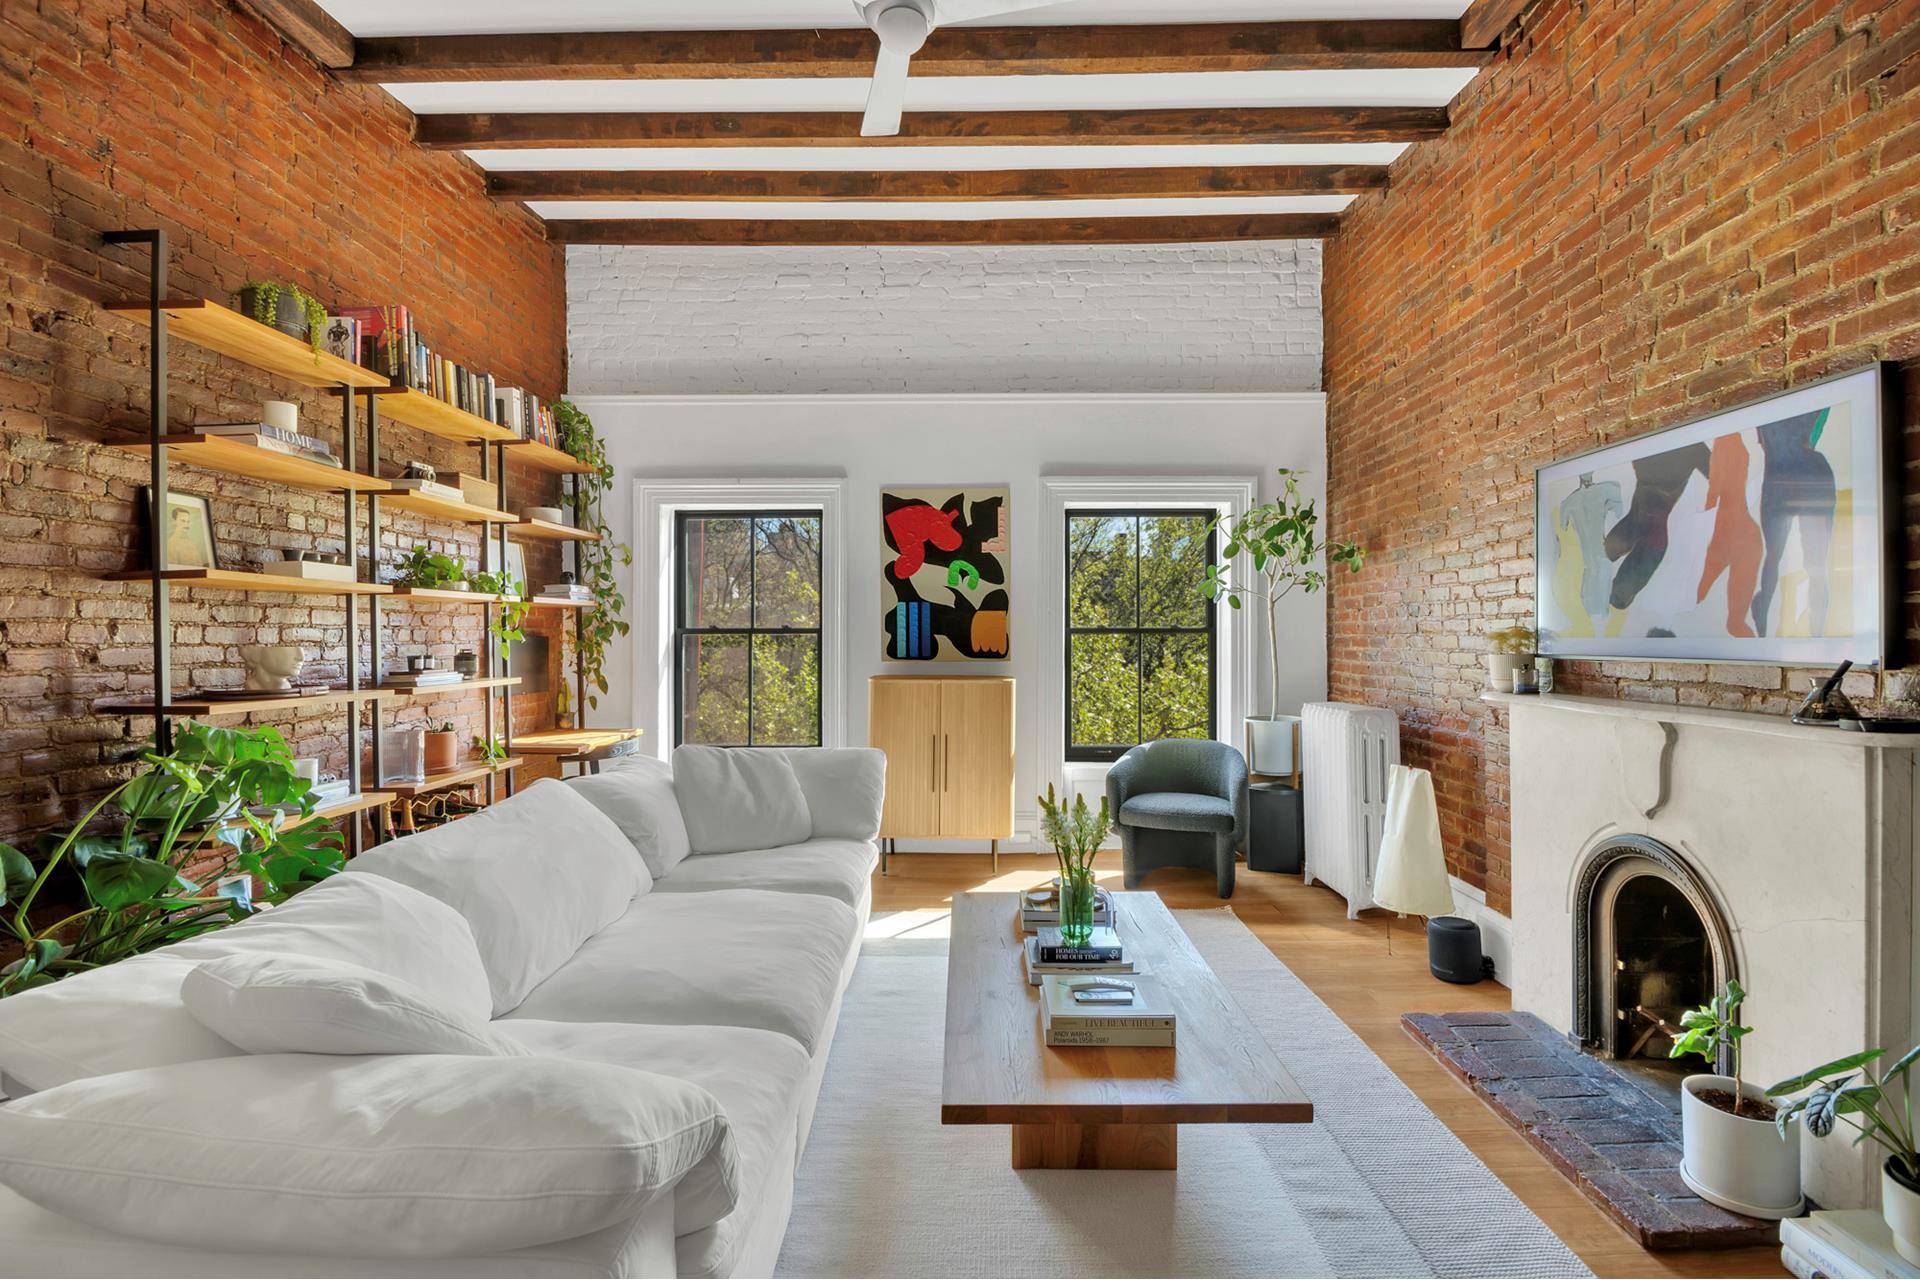 Prime investment or conversion opportunity in the heart of West Chelsea !